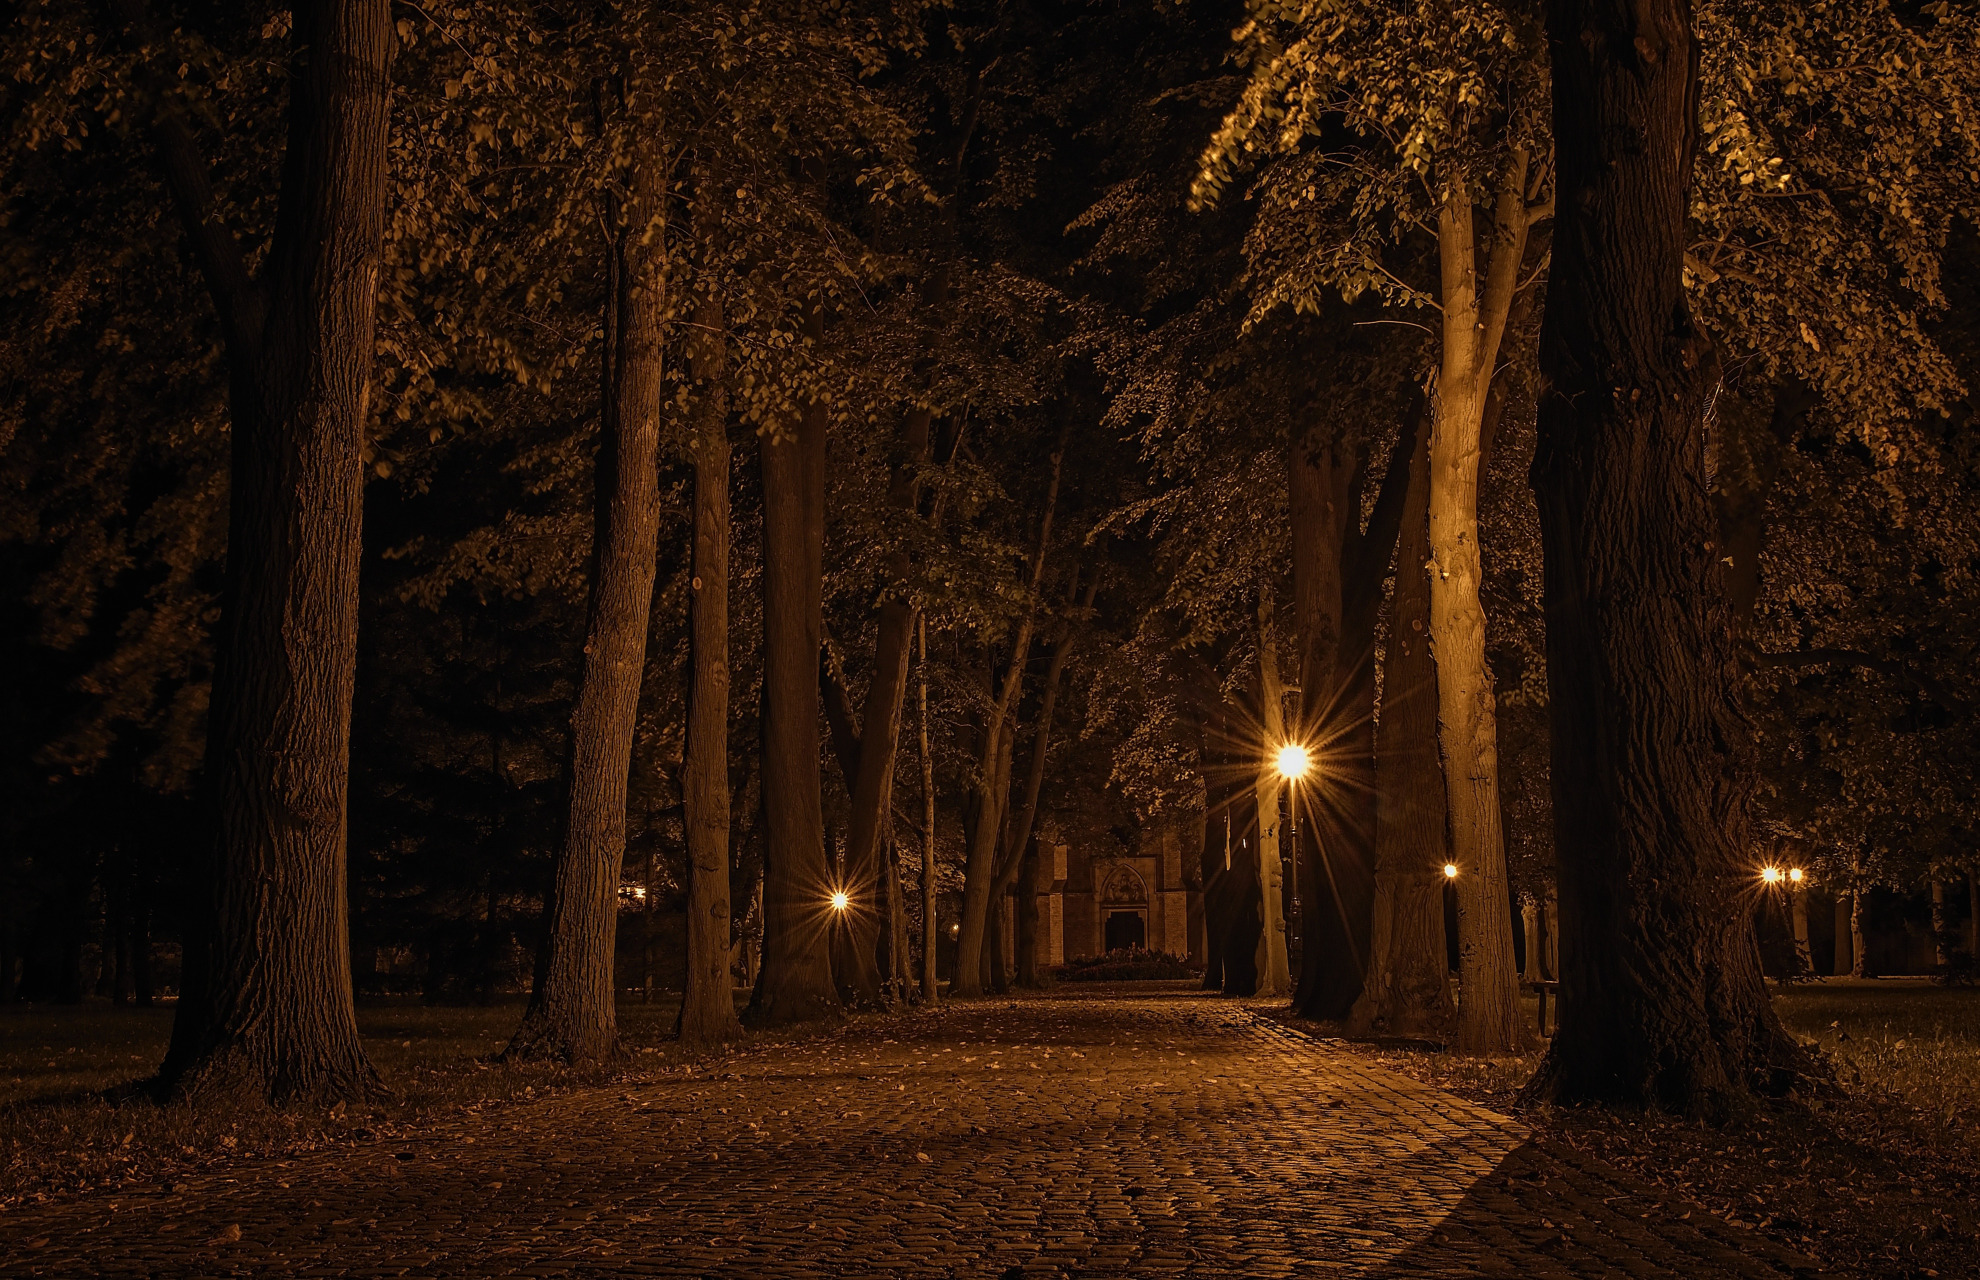 Cemetery Alley At Night Alleyway Street Night Street Light Forest Palm Trees Landscape 1980x1280